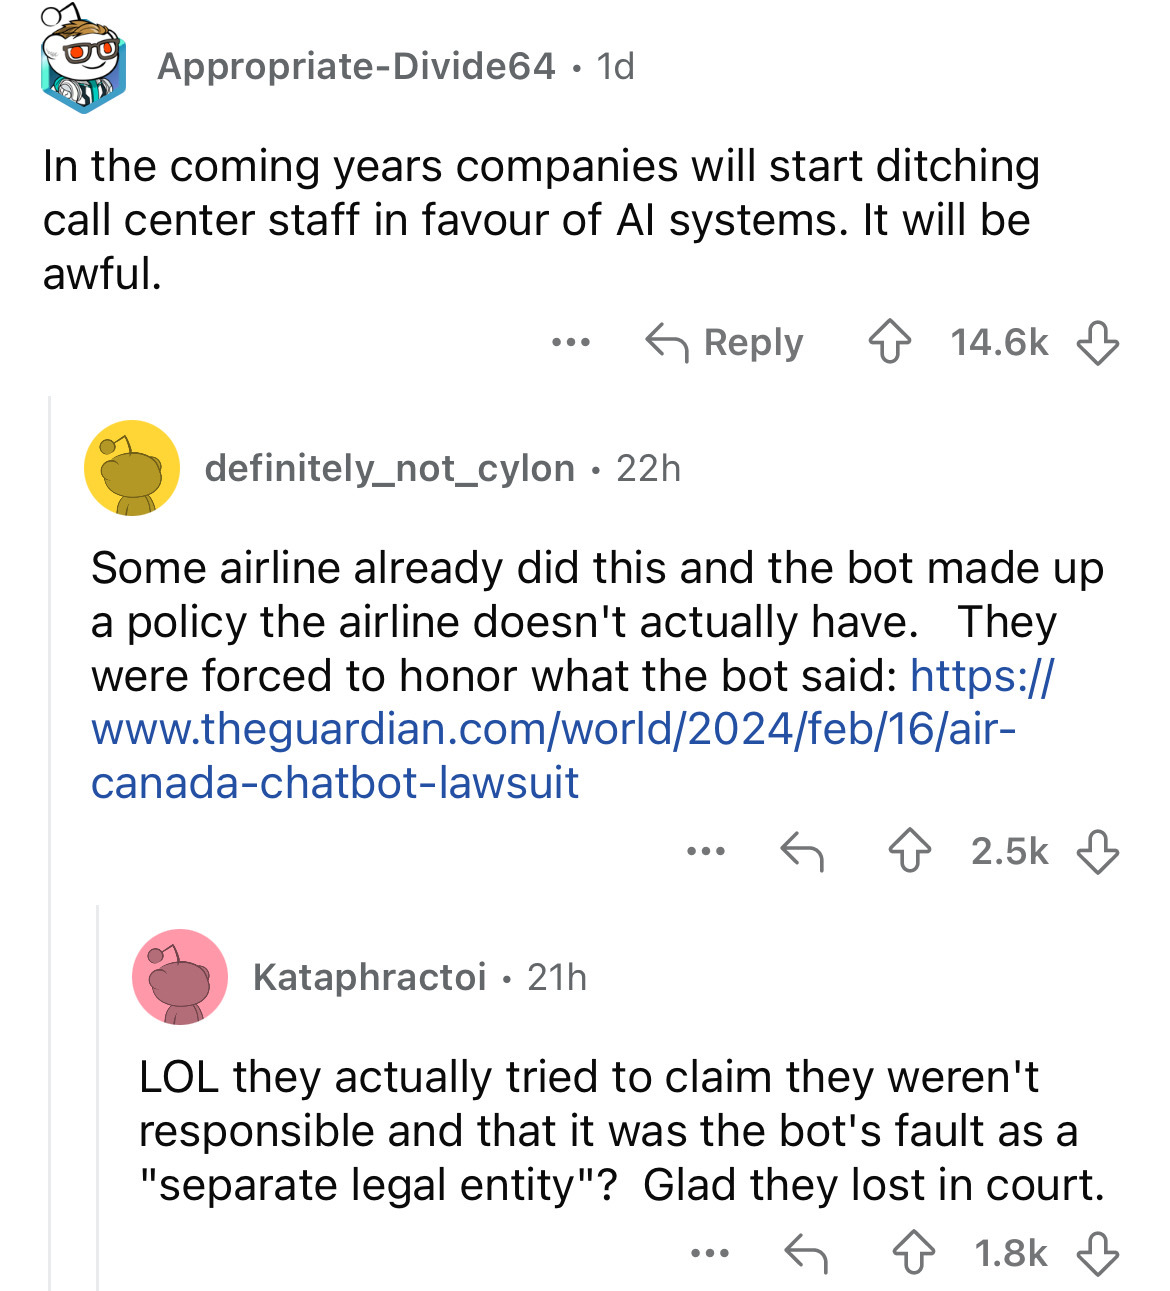 screenshot - AppropriateDivide64 1d In the coming years companies will start ditching call center staff in favour of Al systems. It will be awful. ... definitely_not_cylon 22h . Some airline already did this and the bot made up a policy the airline doesn'